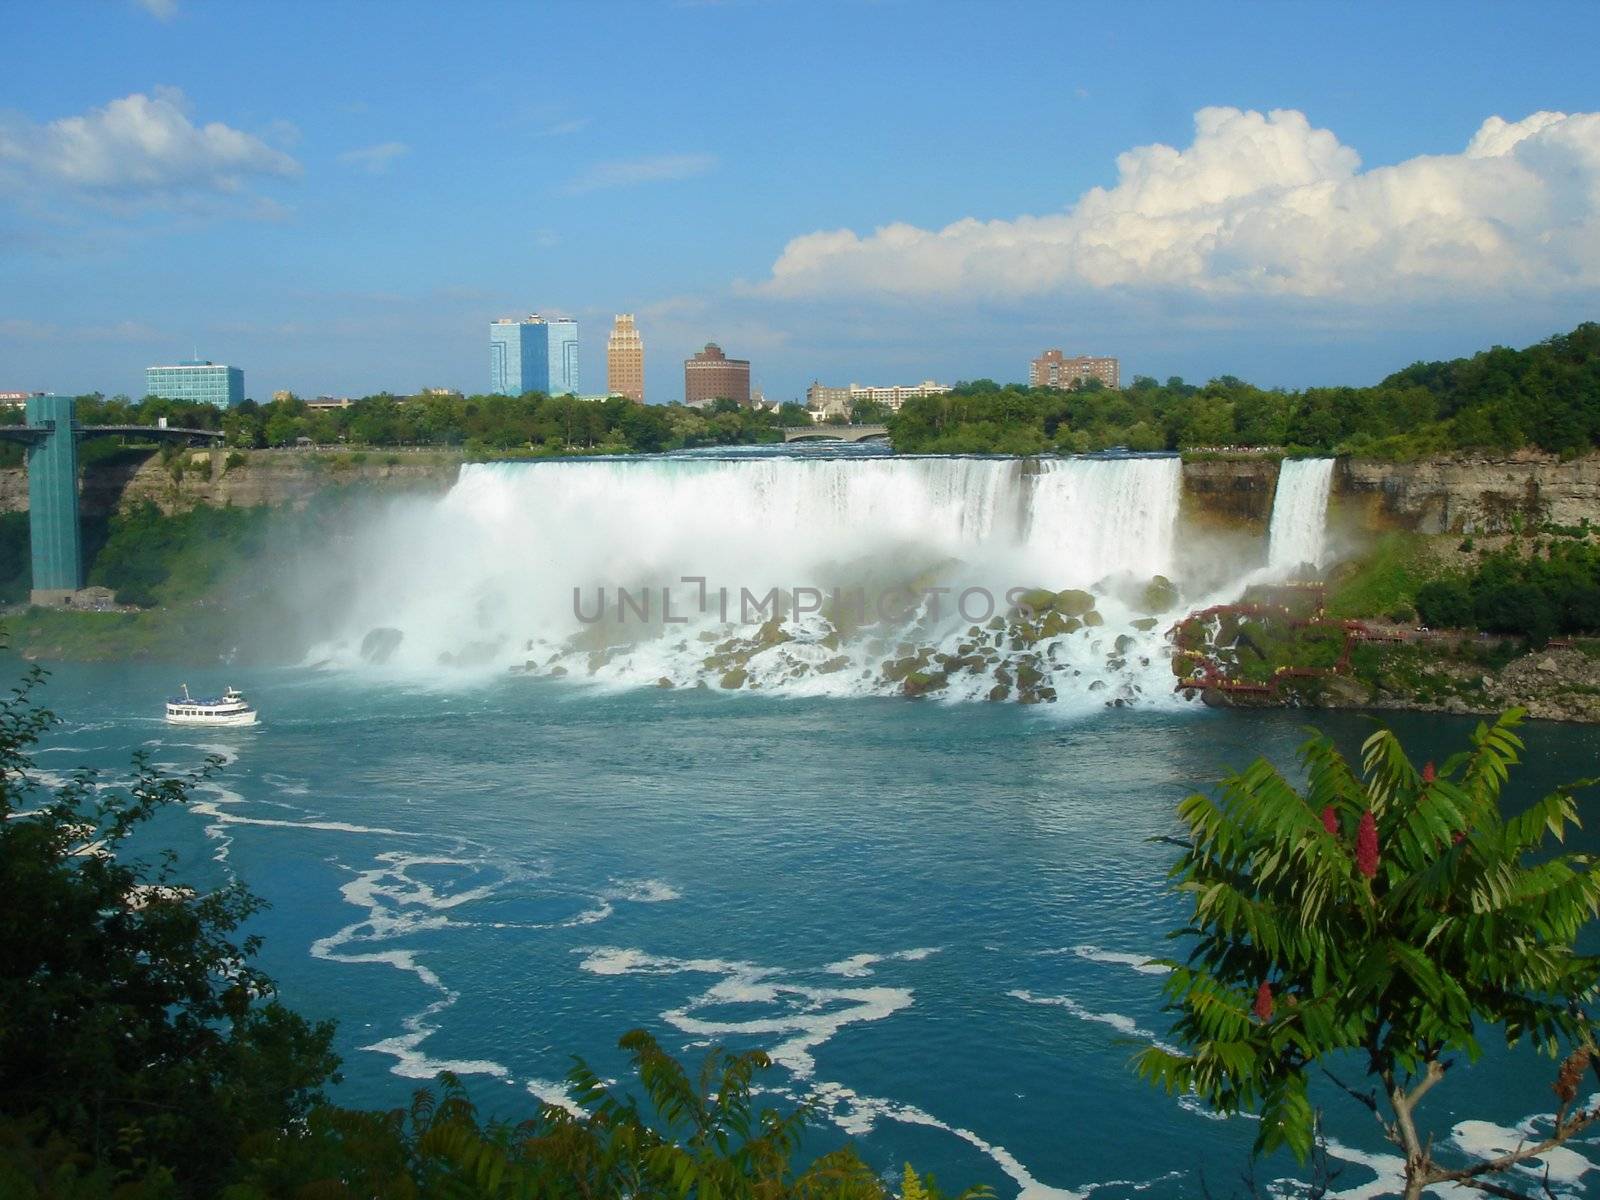 Niagara falls from far with boat and buildings and vegetation